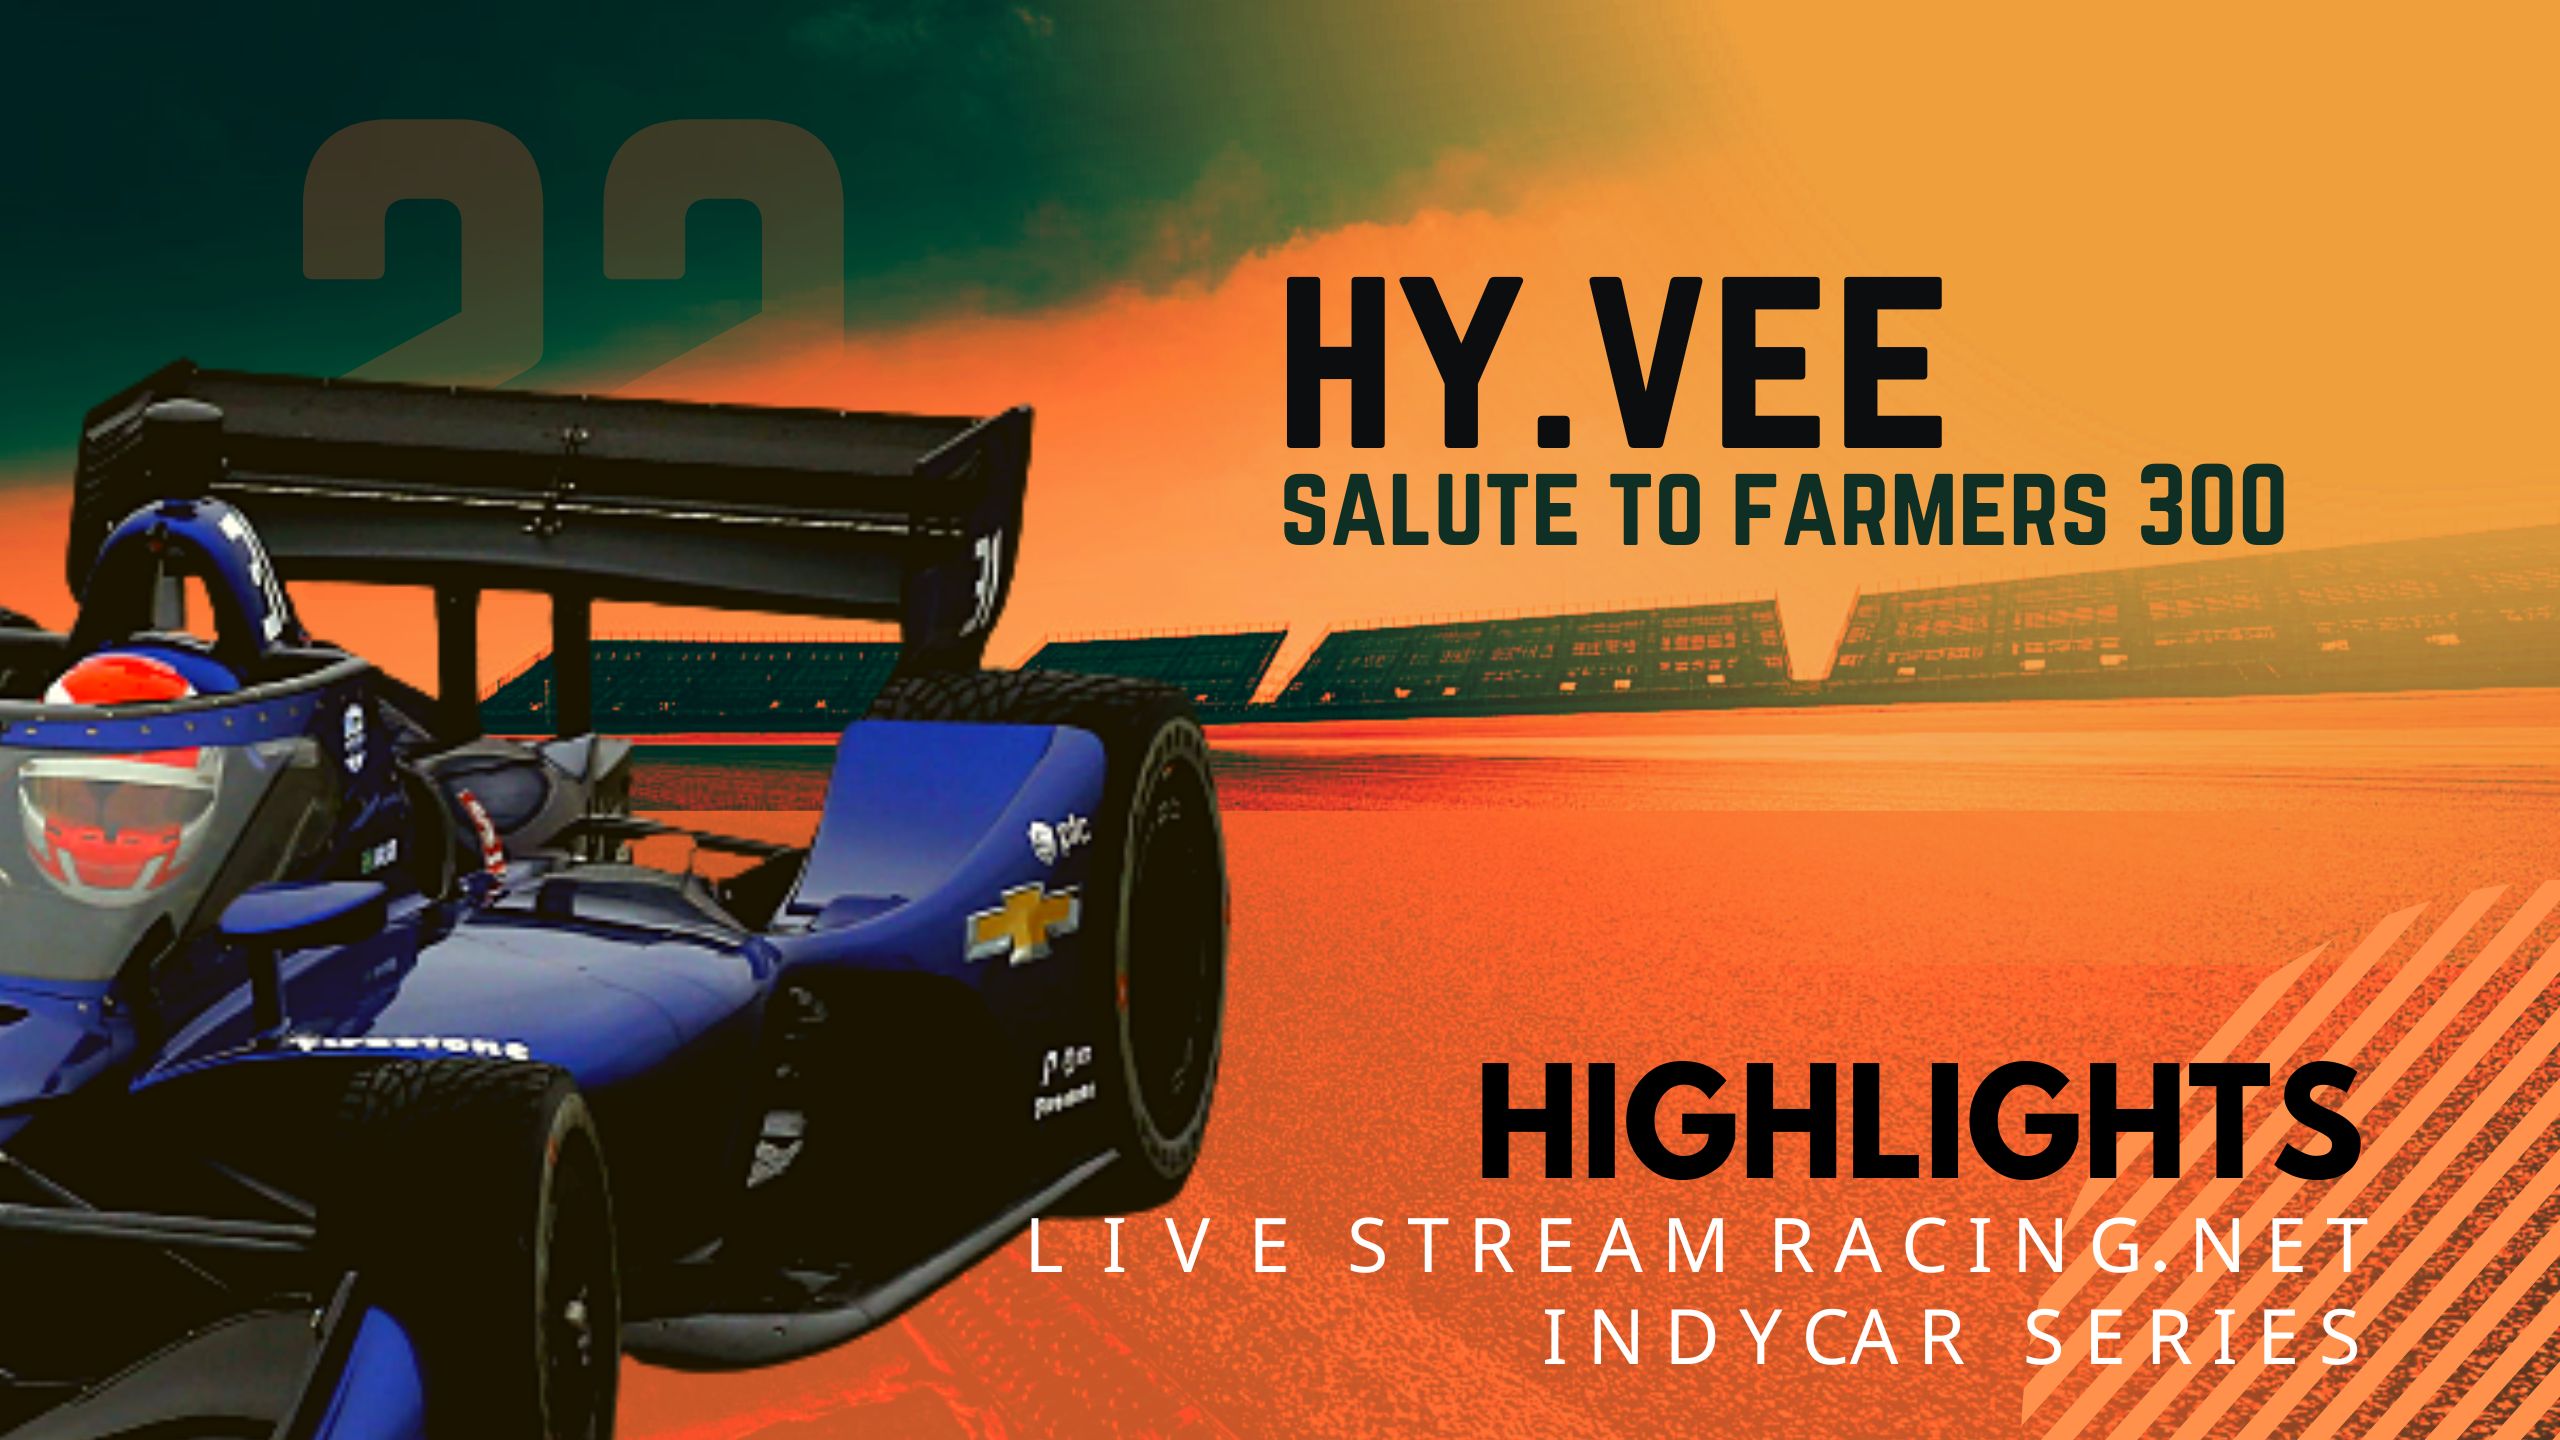 HY VEE Salute To Farmers 300 Indycar 2022 Highlights Race